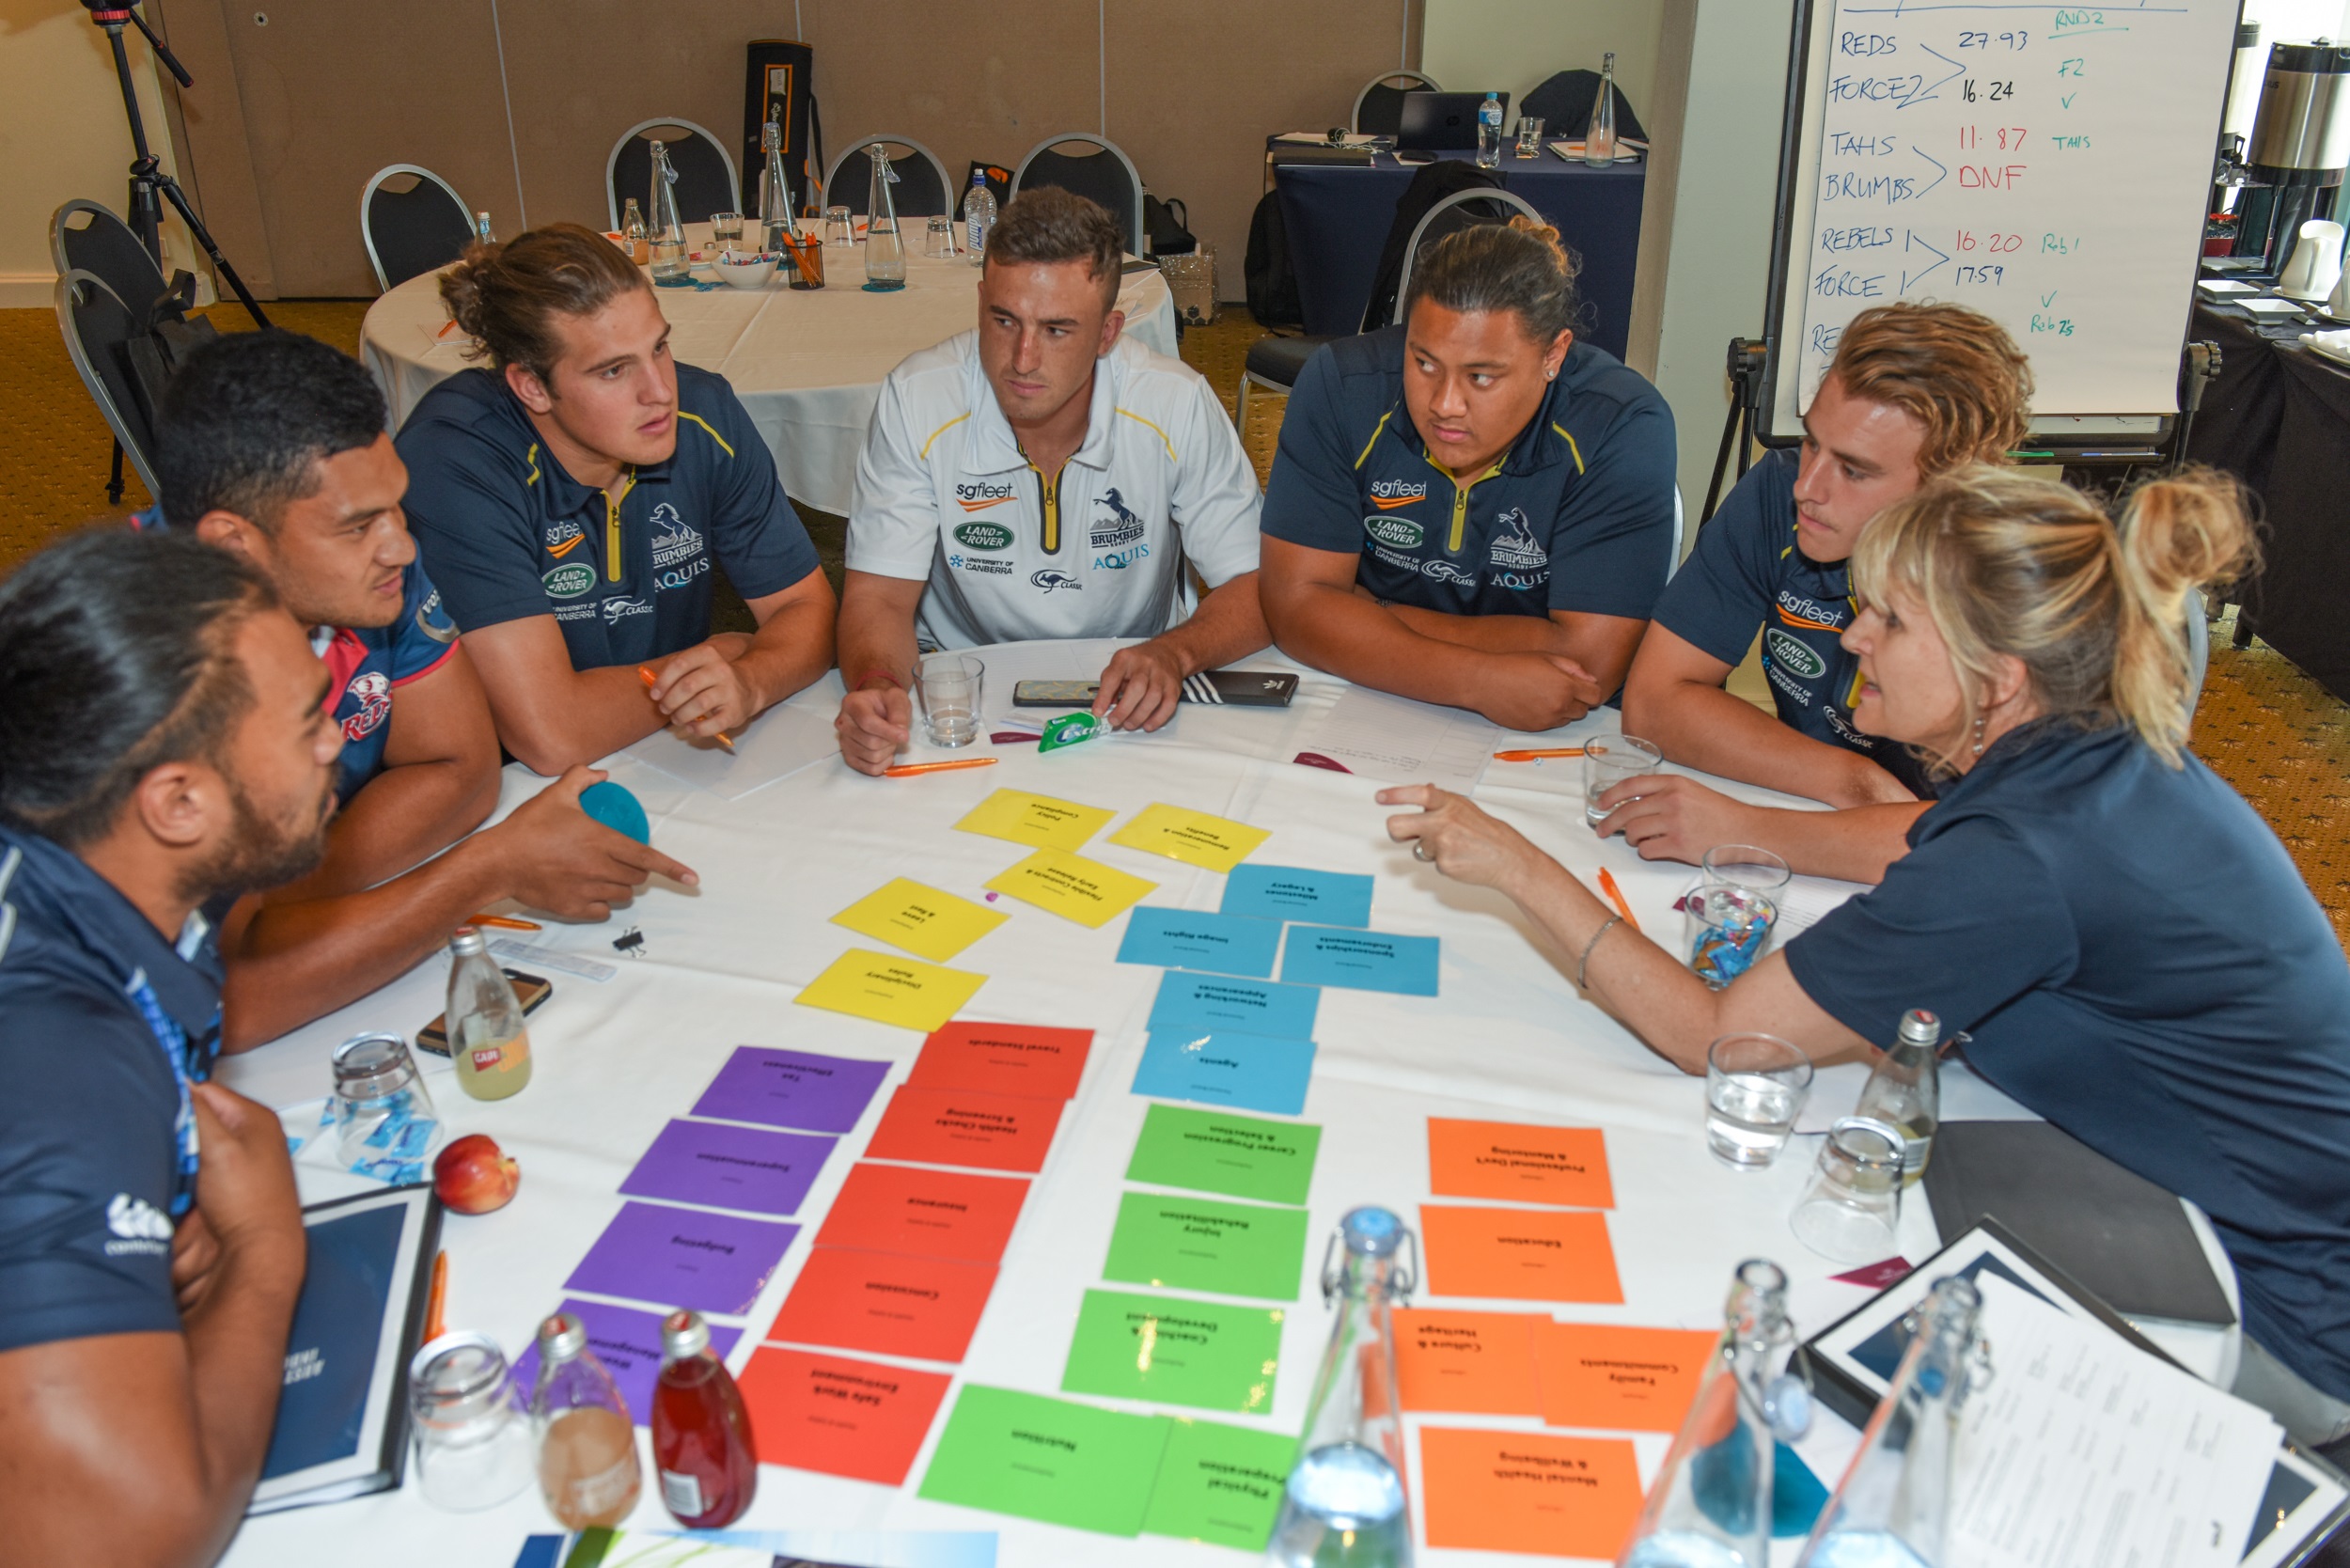 Robin Duff guides Brumbies off the field in player wellbeing and development manager role